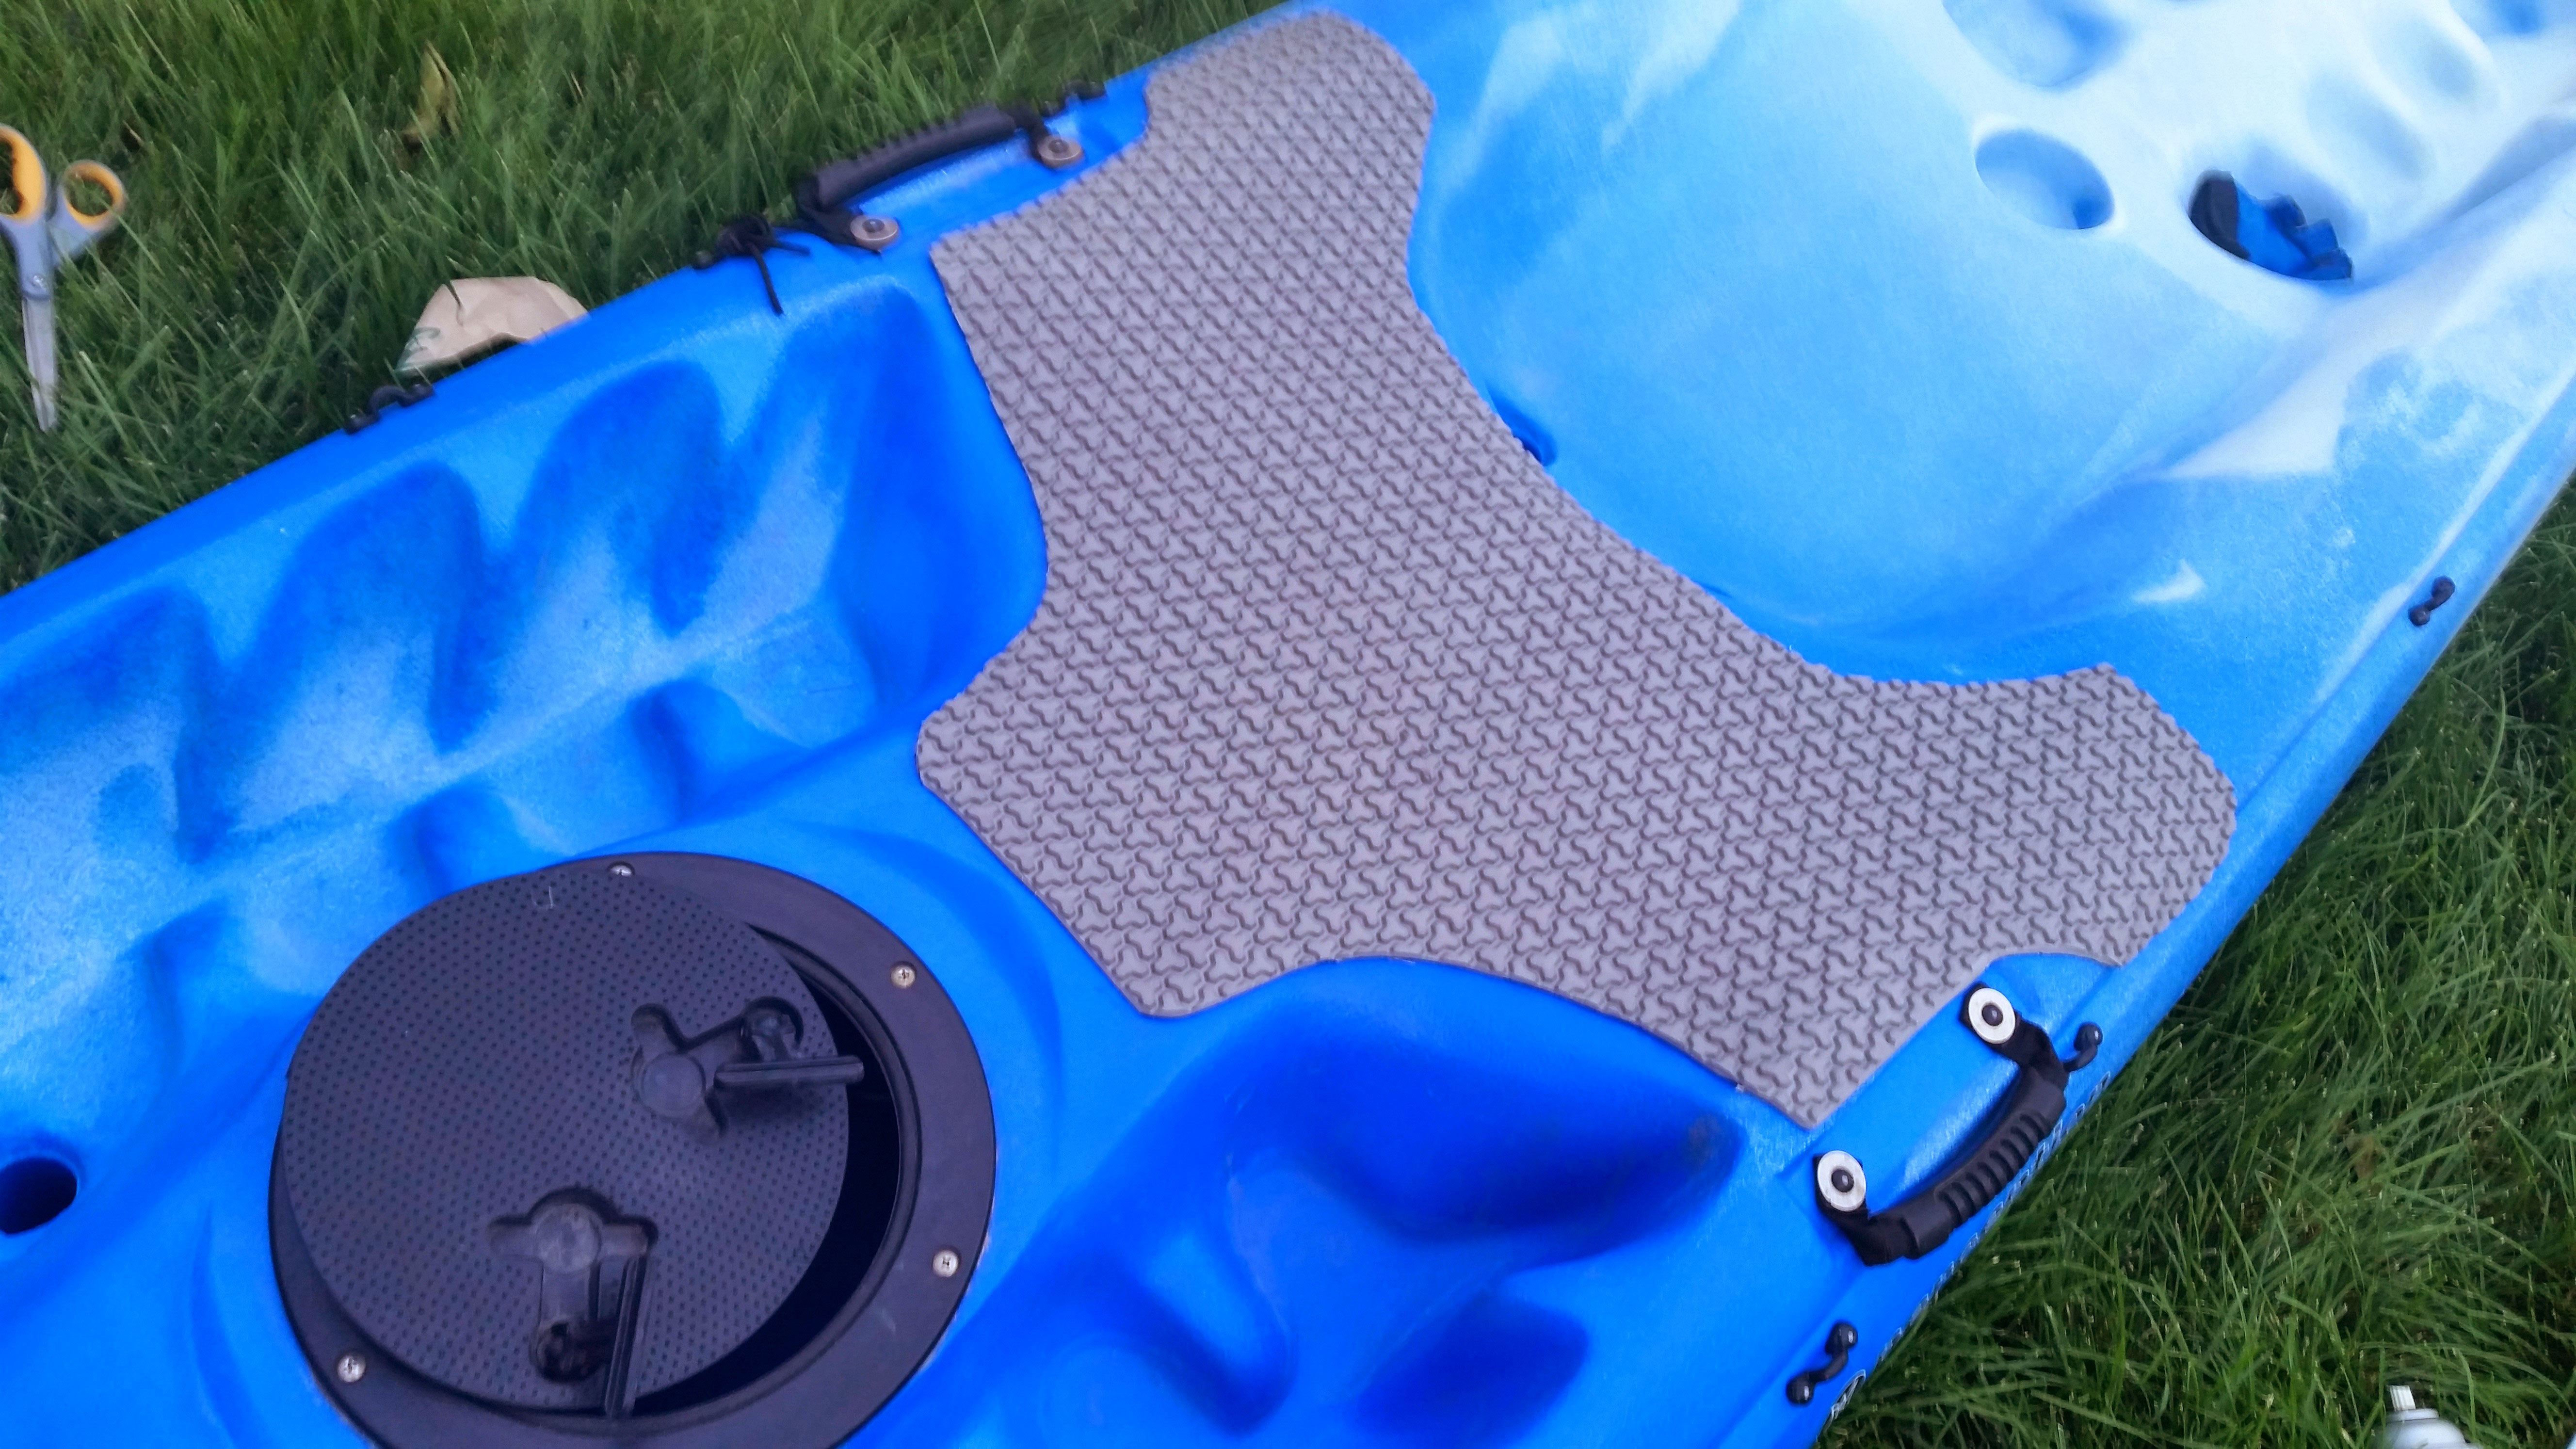 Traction Mat installed on a Kayak